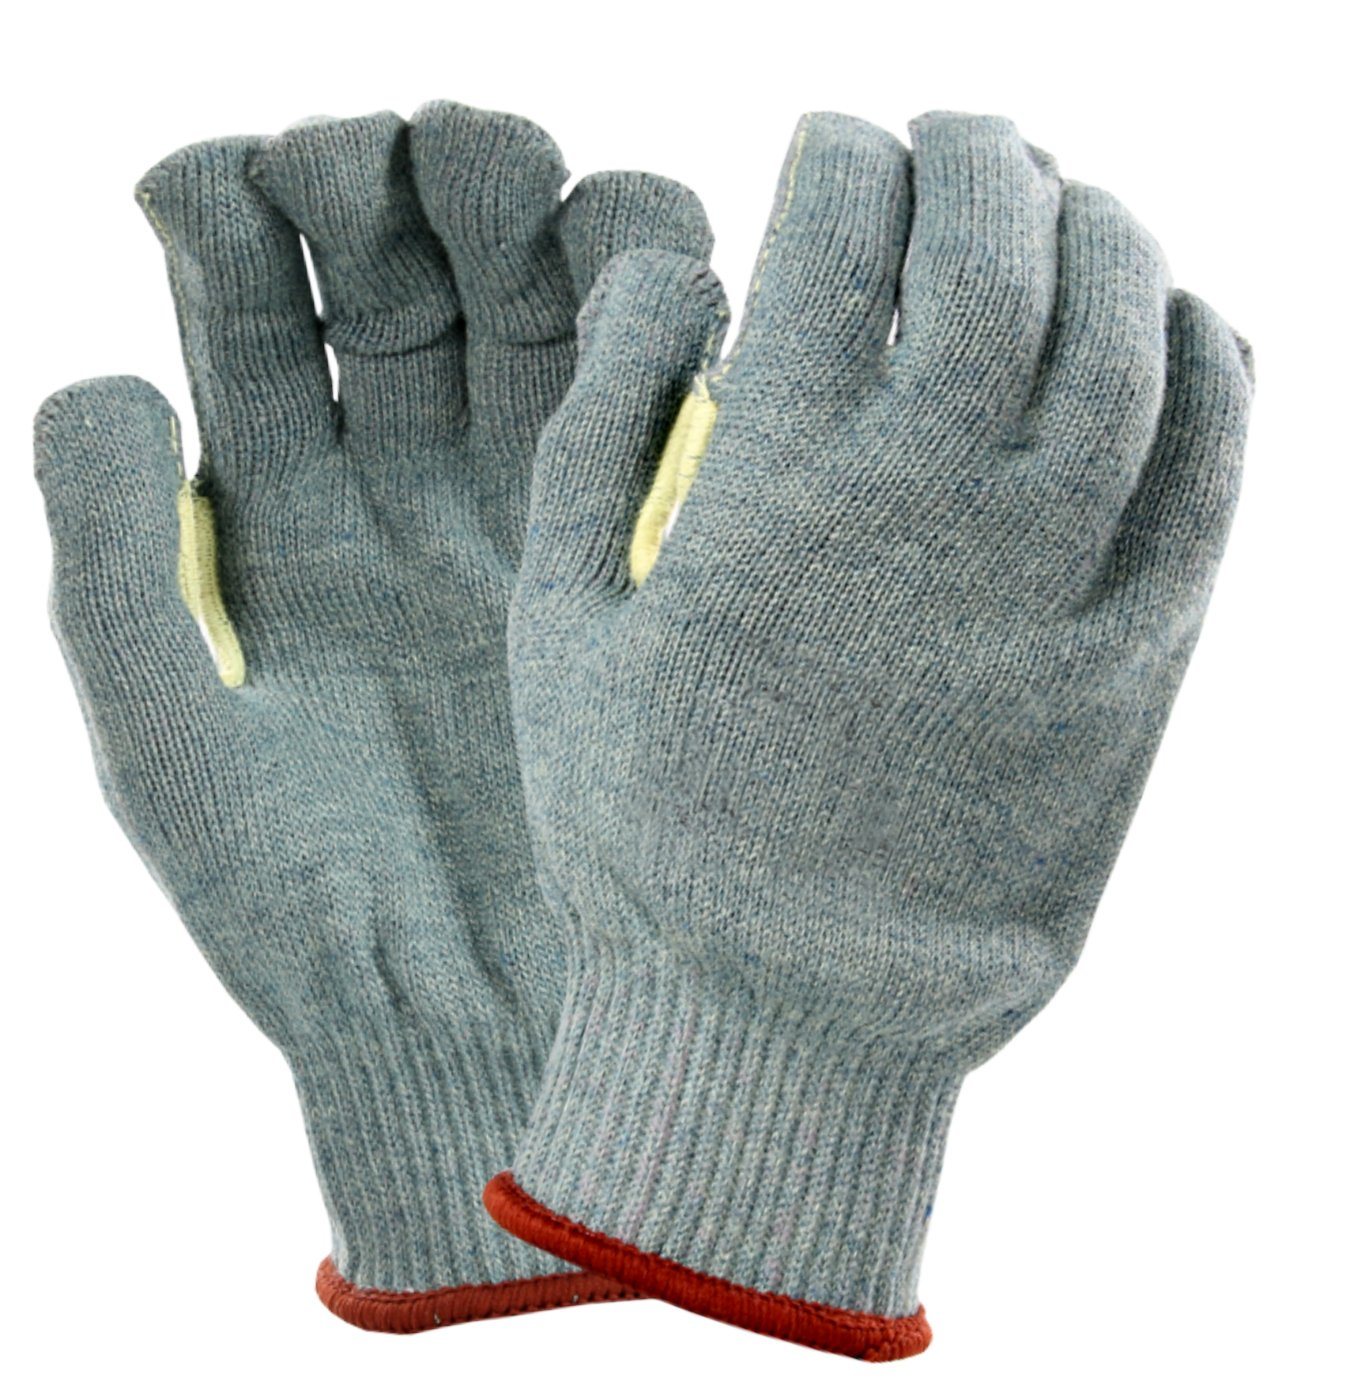 Anti Cut Tear-Resistant Safety Work Glove with Cow Leather